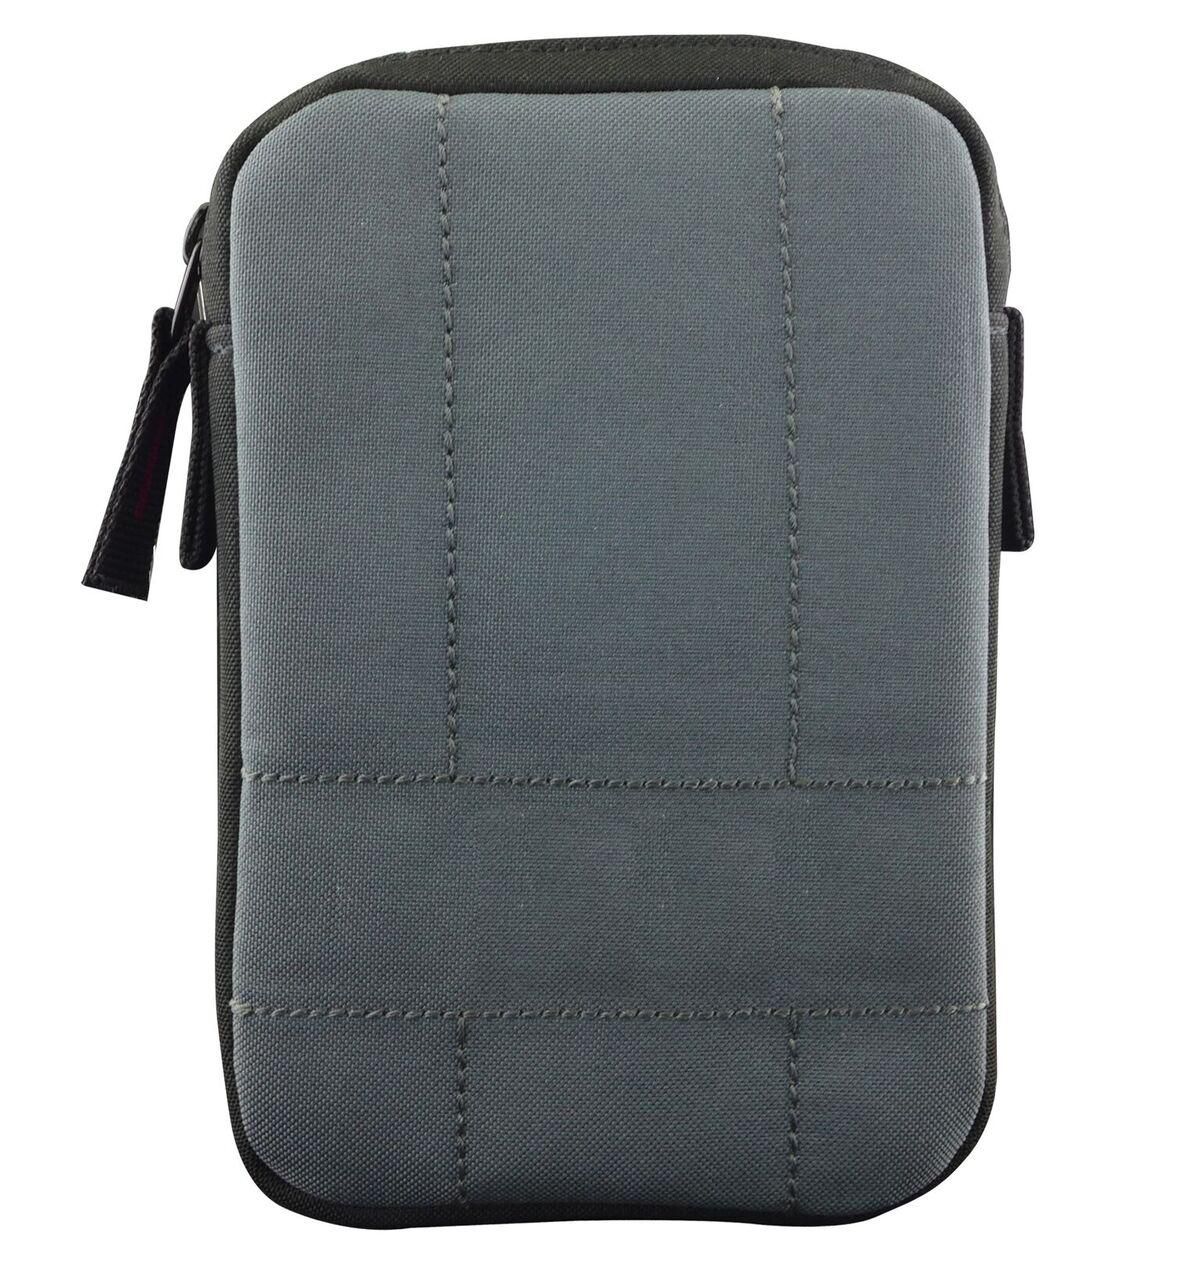 Winmate 9B000000000X tablet case